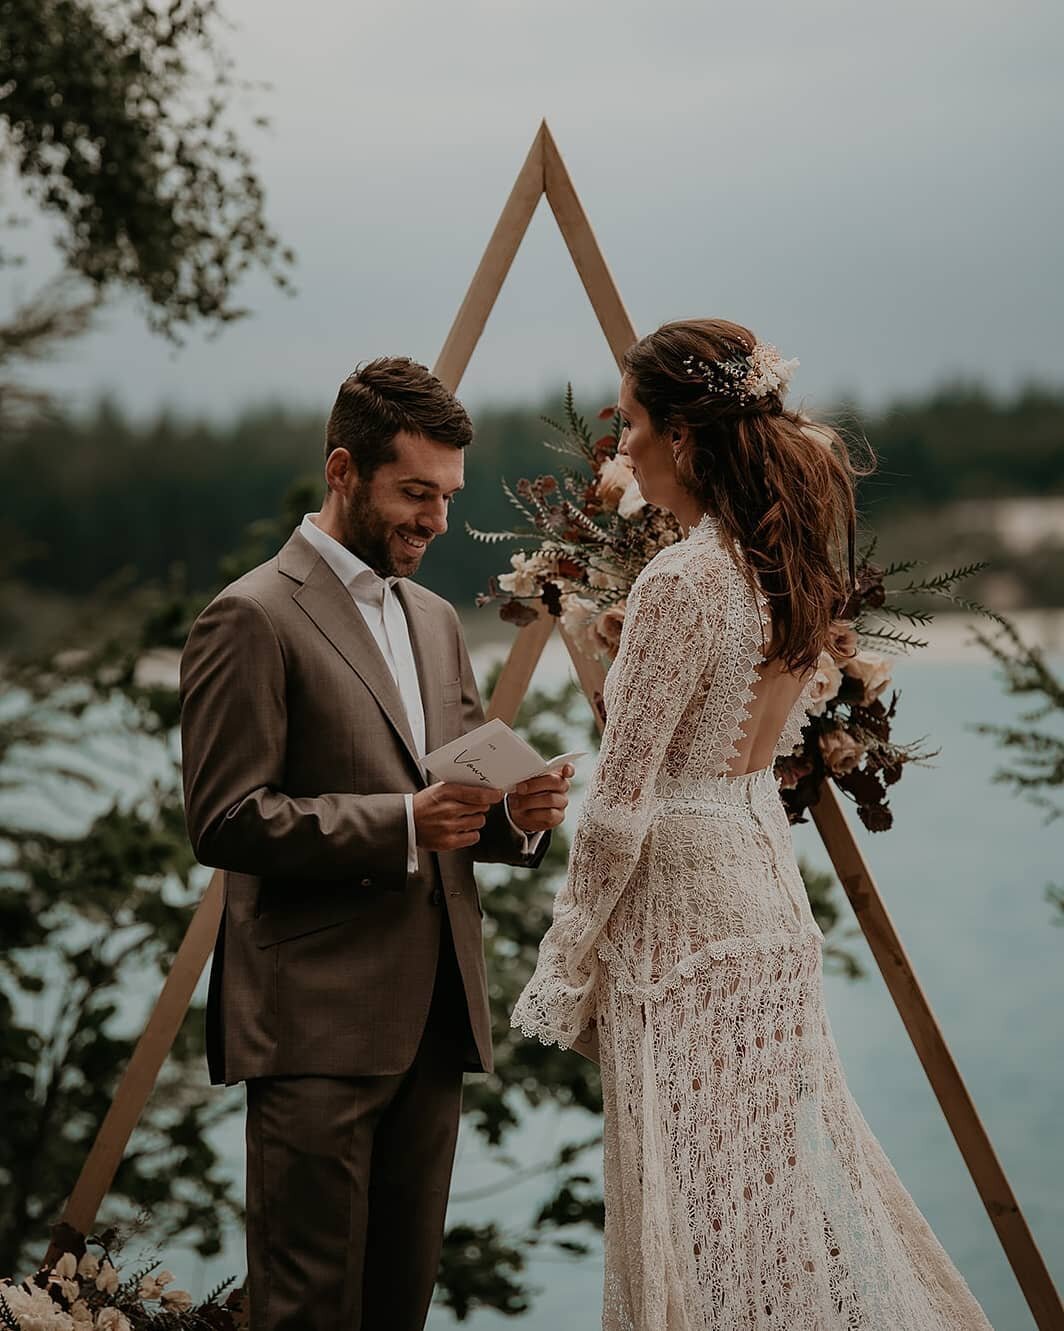 How to write your wedding vows? 5 simple tips to help you write your vows ⬇

1) Start with who this person is to you.
2) Think about 3 moments that made you feel the happiest &amp; think about 3 hard moments that impacted you the most.
3) Pick the ha